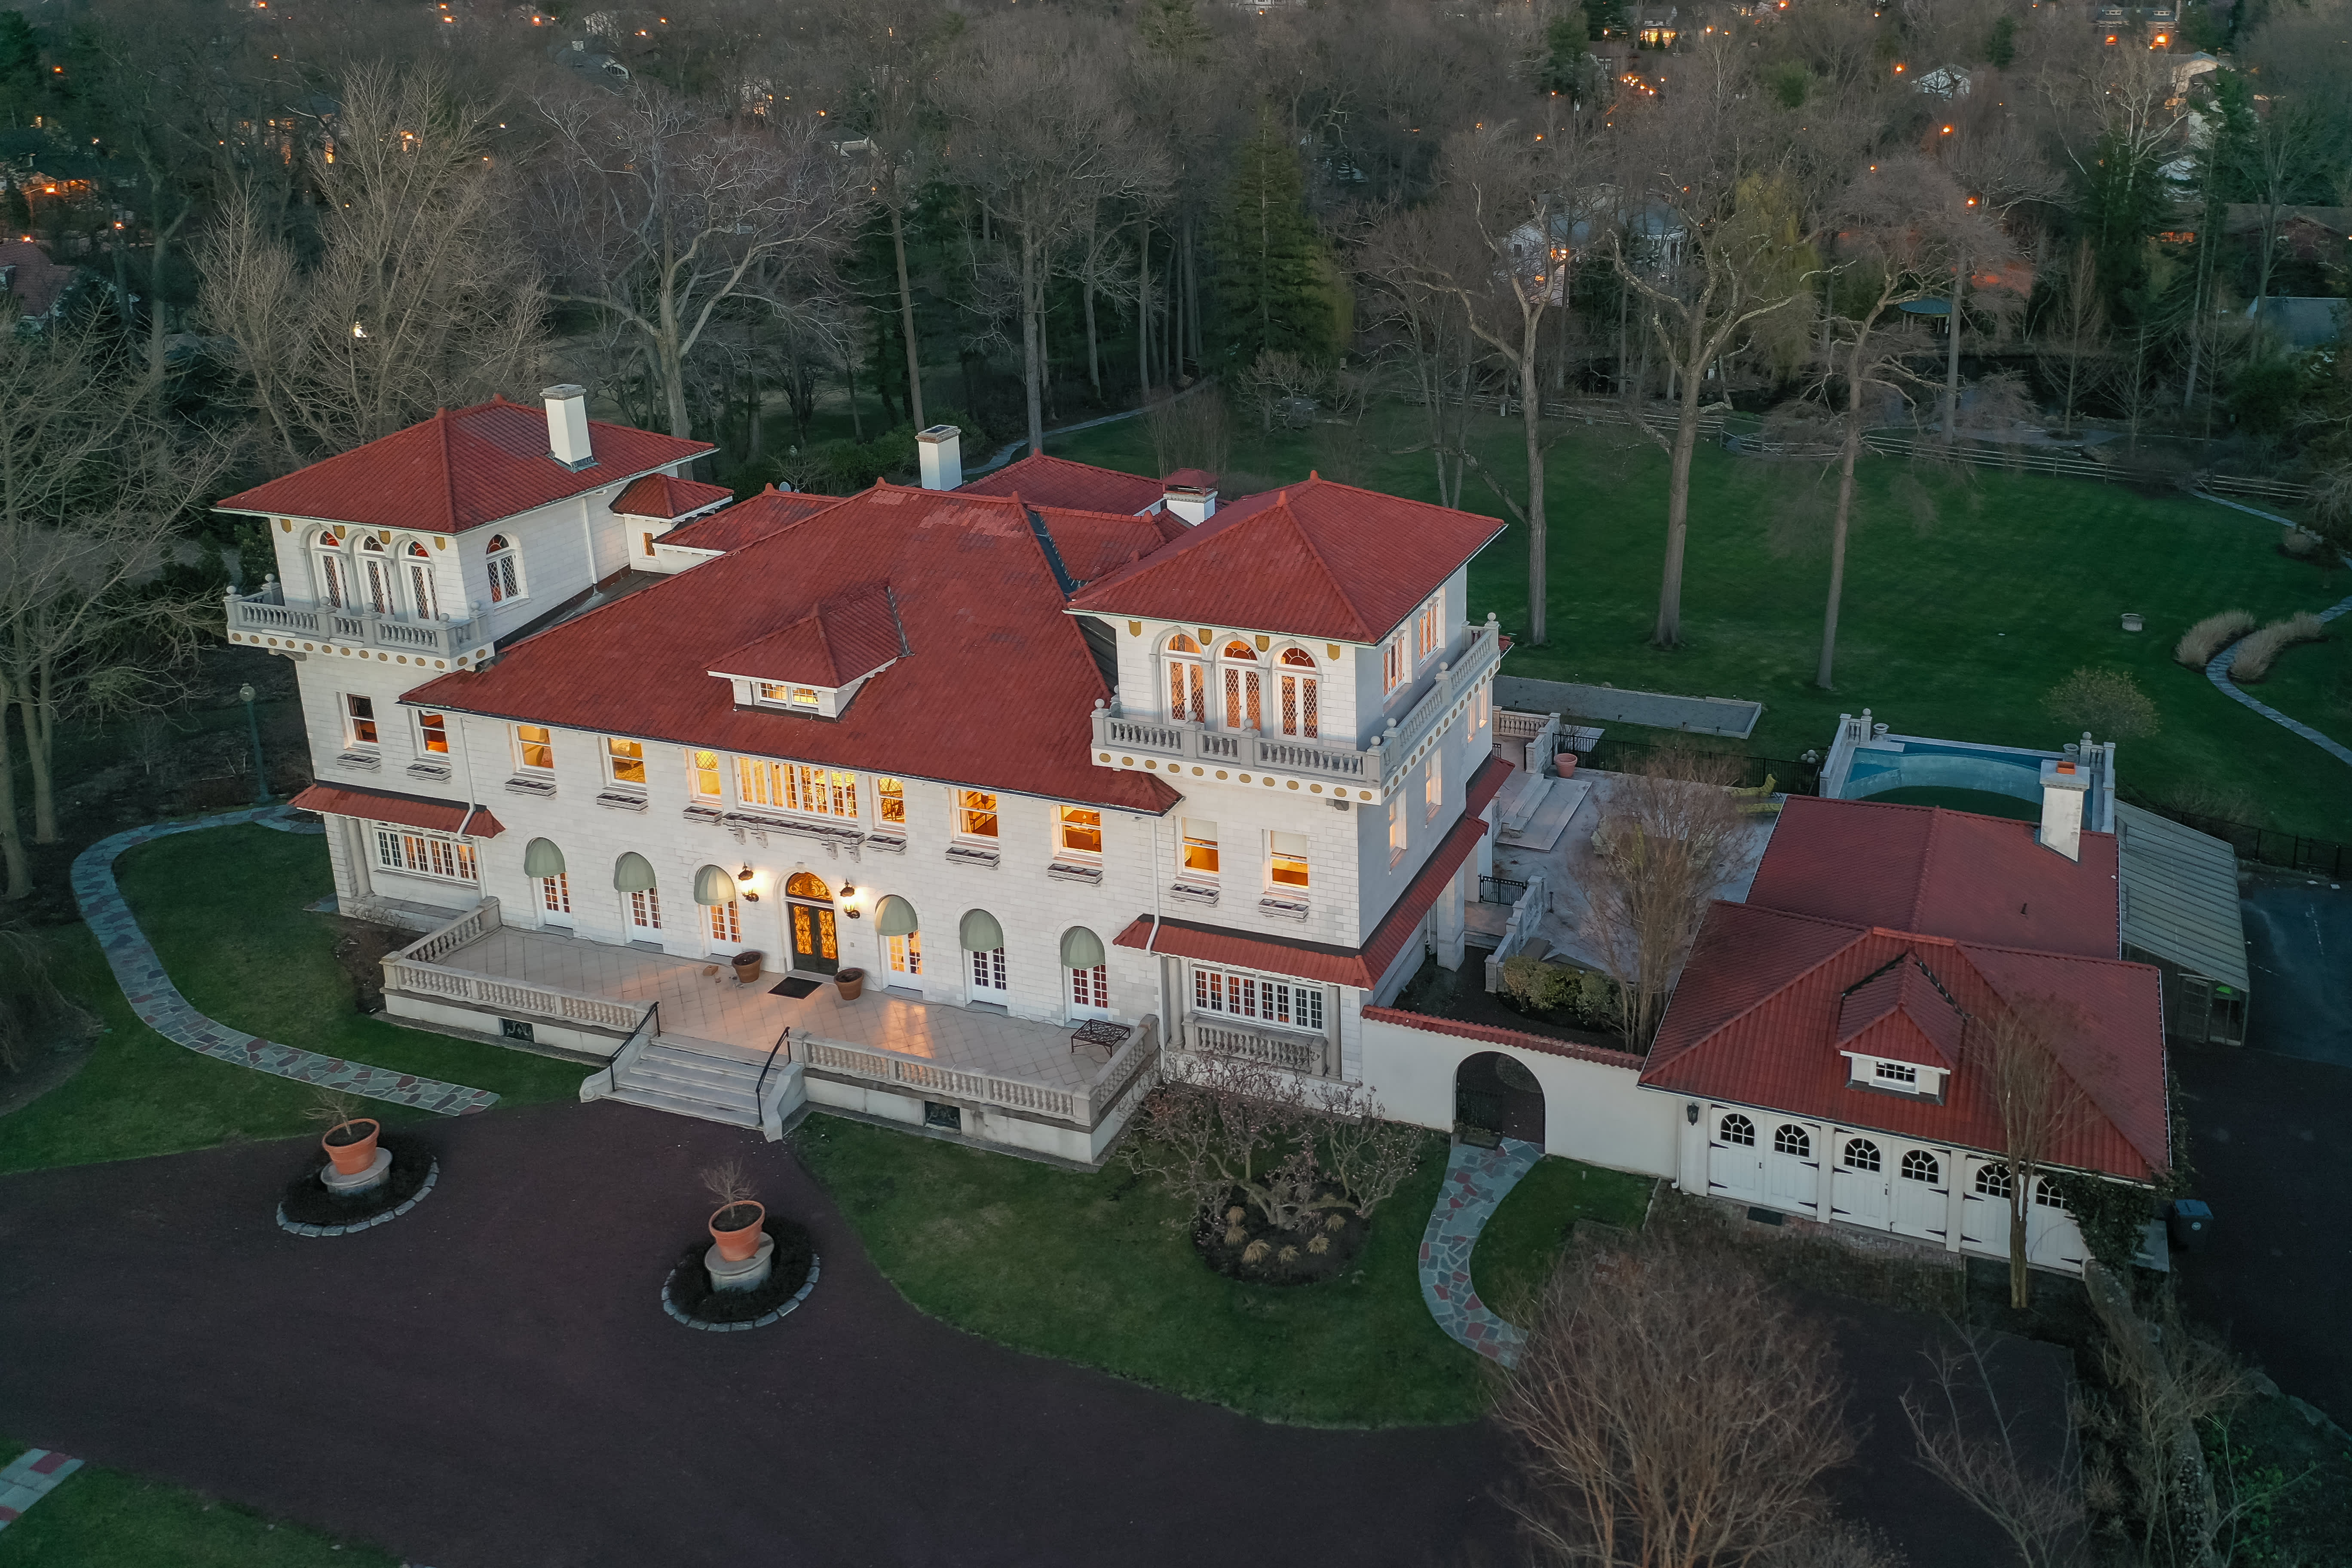 Mansion, once asking $39 million, sells for $4.6 million. Here’s what happened